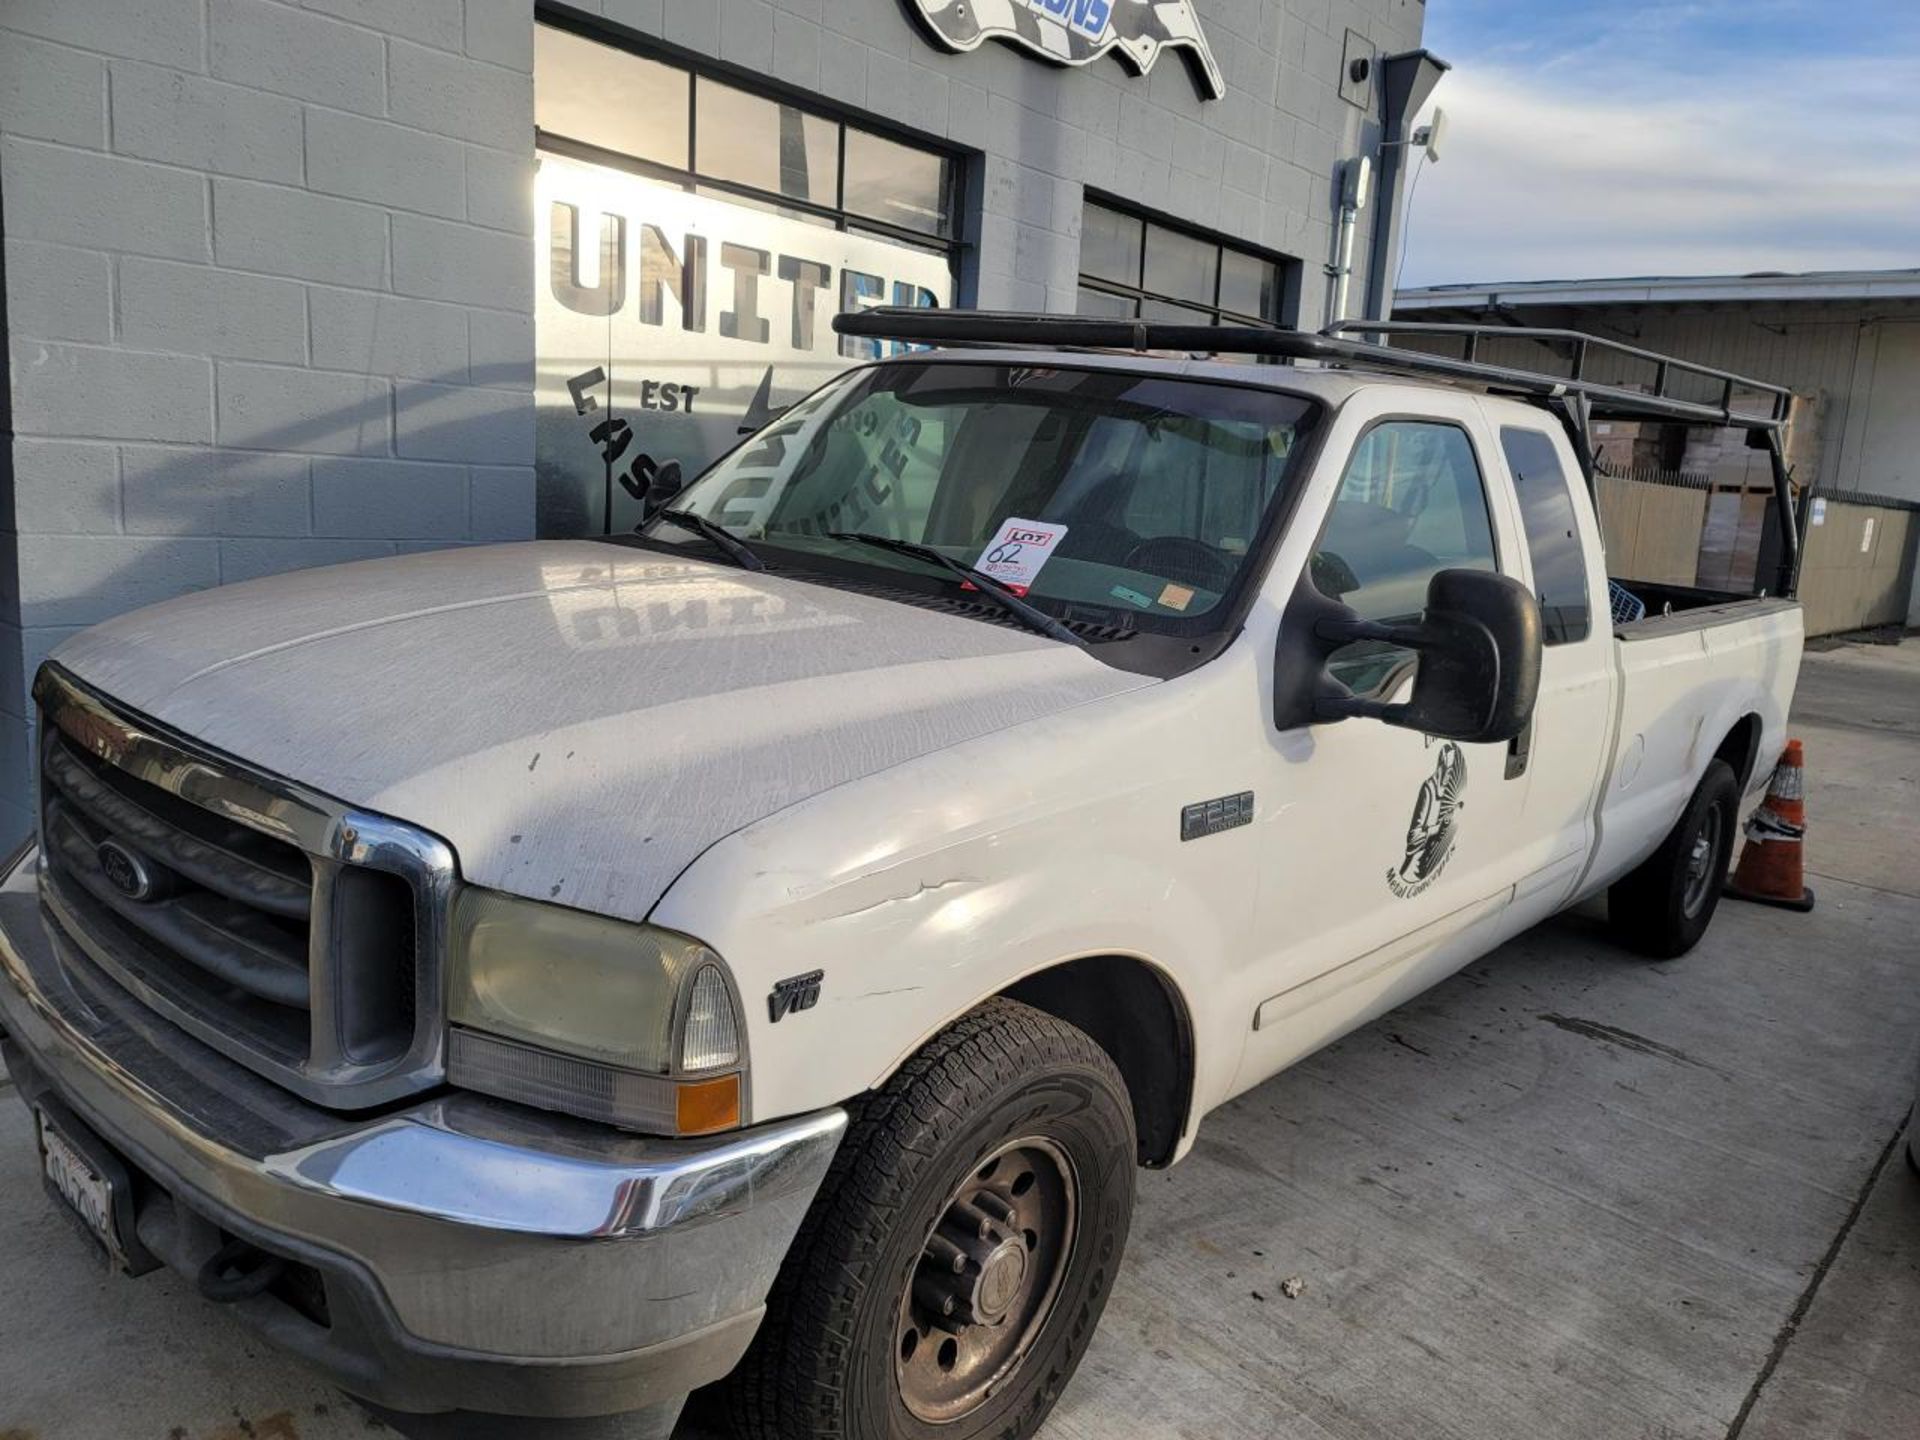 2002 FORD F-250 SUPER DUTY GAS PICKUP TRUCK, EXTRA CAB, PULL OUT SLIDING BED, TRITON V-10, VIN: